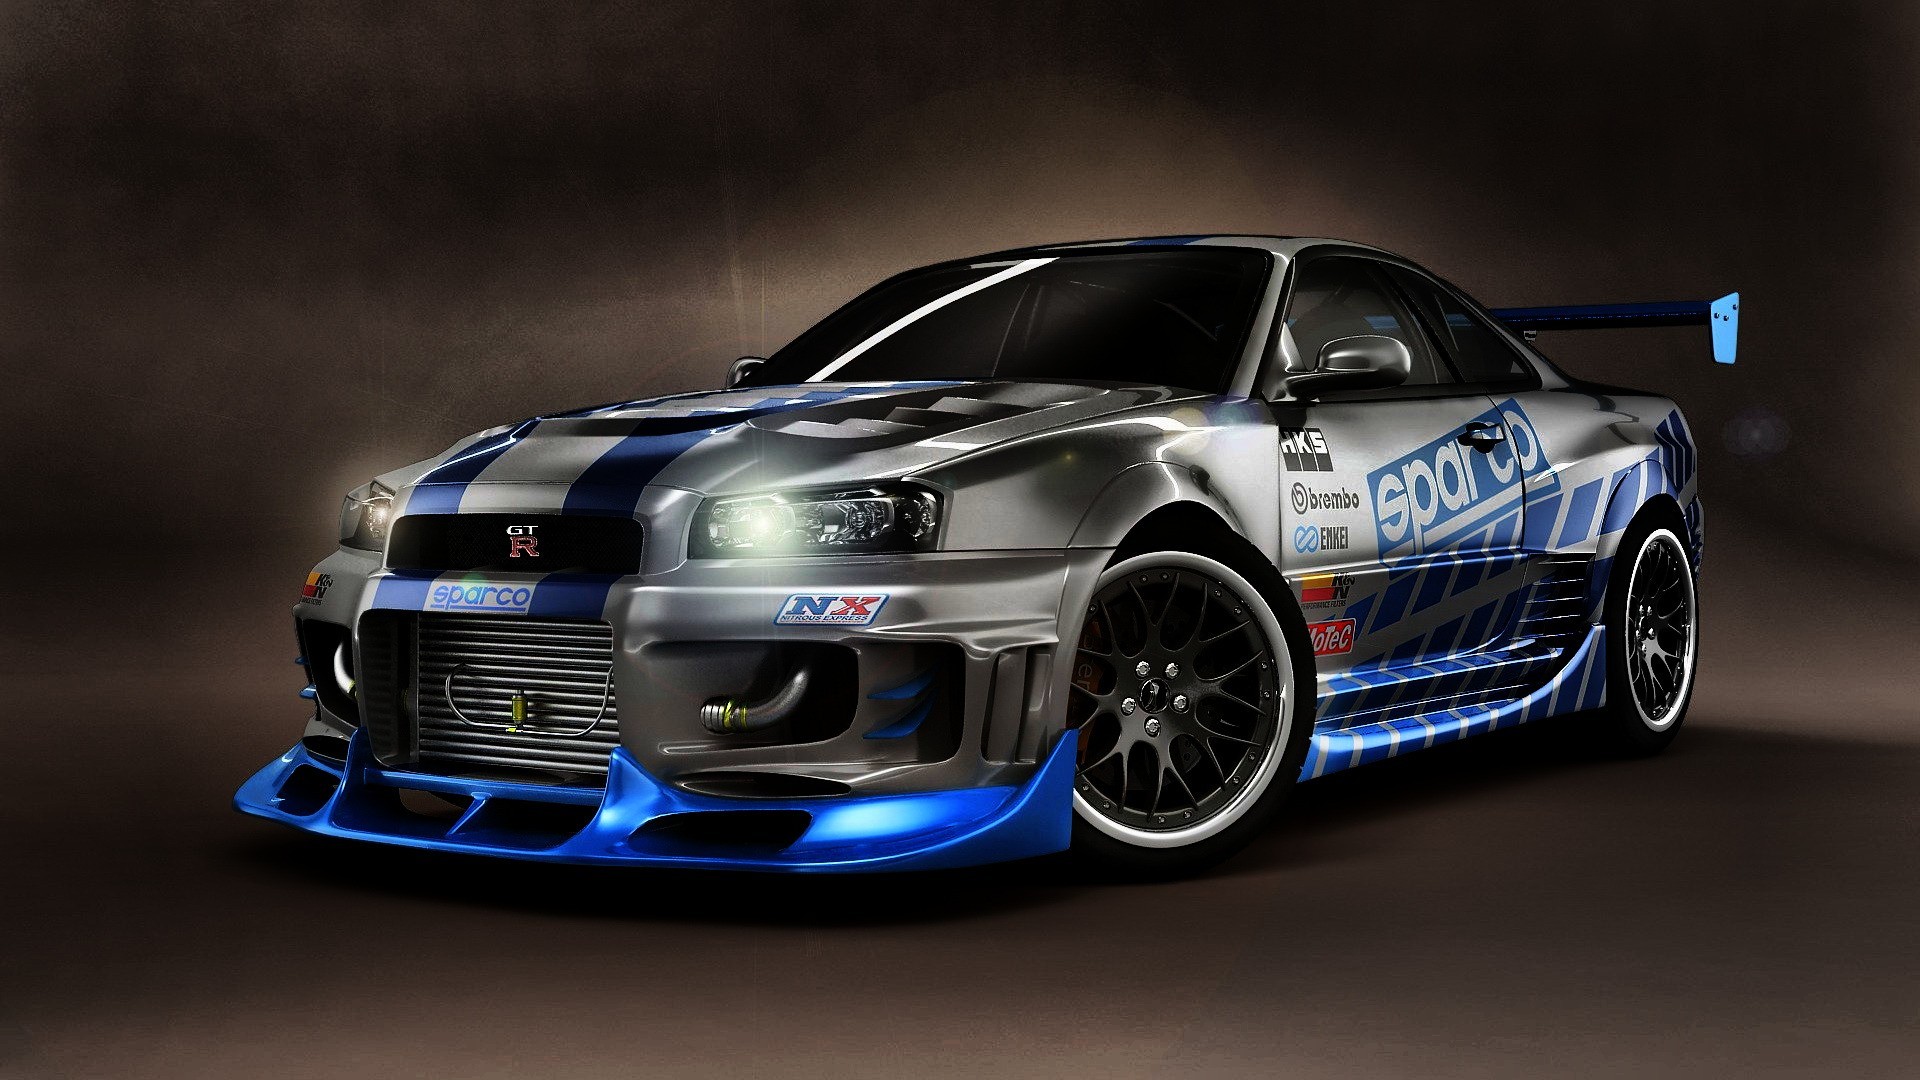 1920x1080 Nissan Skyline GTR - this might feed my need for speed & my life long  desire to one day drive a race car!